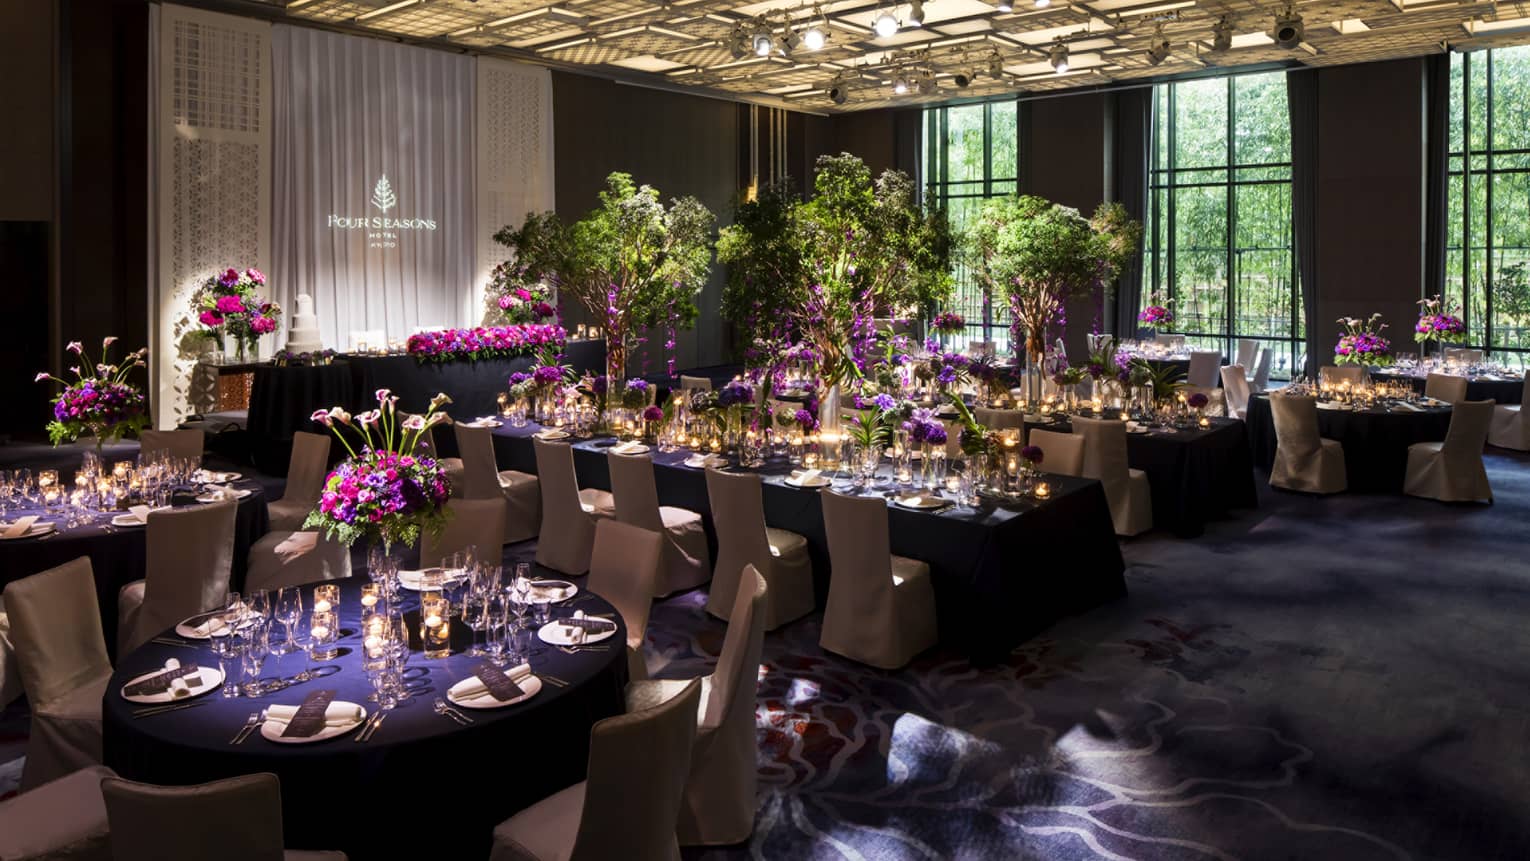 Wedding reception banquet, tables set with purple linens and flowers, under modern ceiling with lights